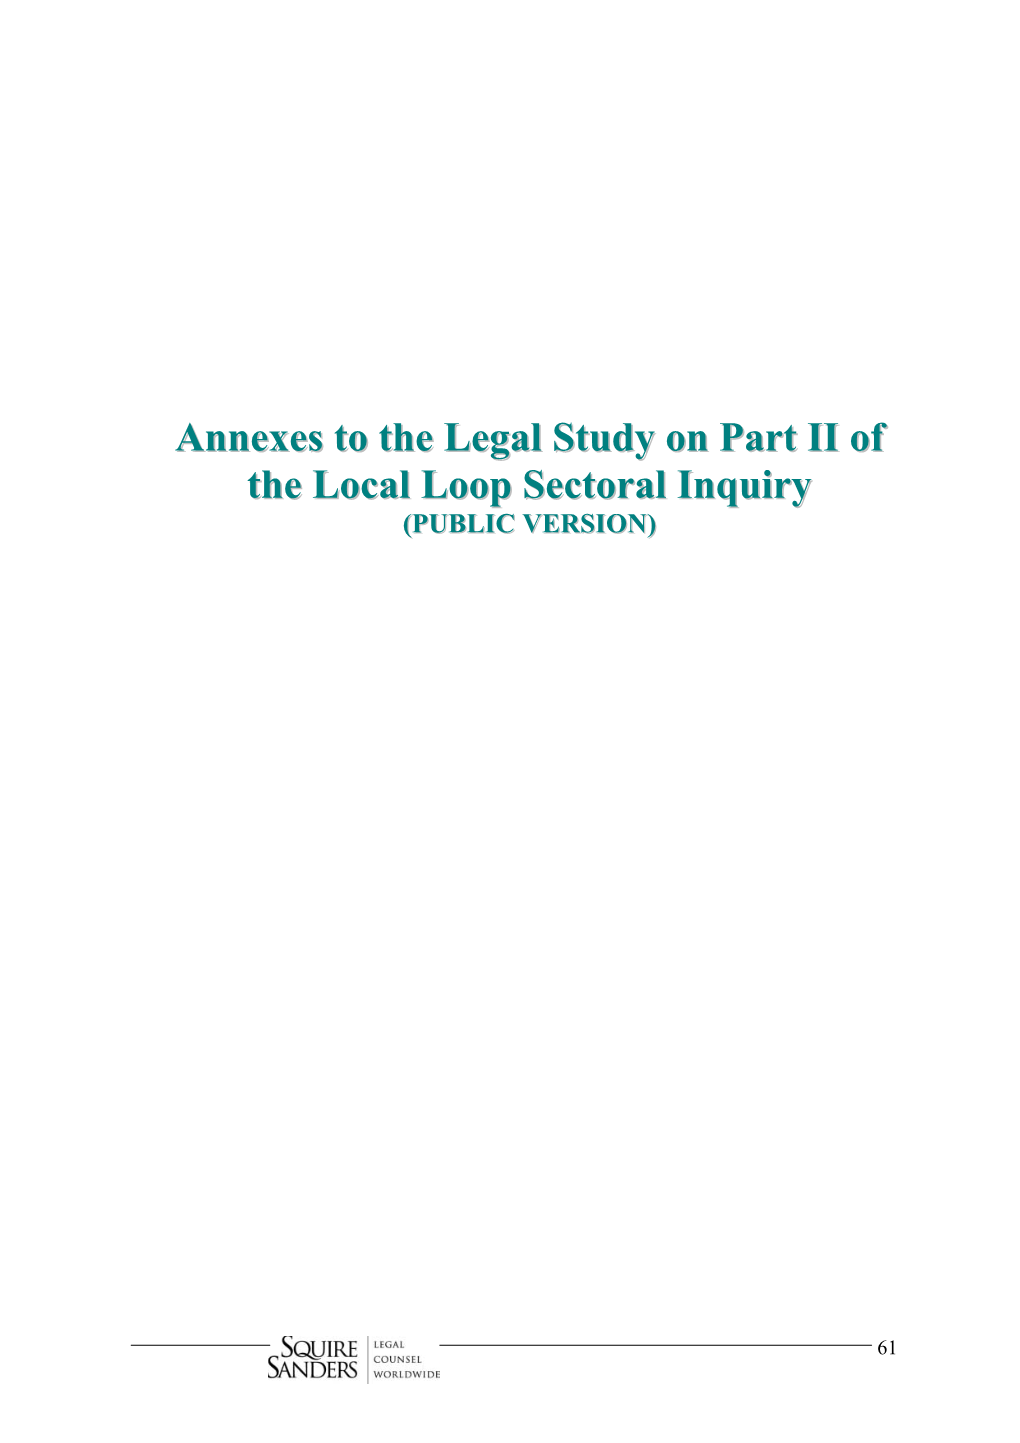 Annexes to the Legal Study on Part II of the Local Loop Sectoral Inquiry (PUBLIC VERSION)